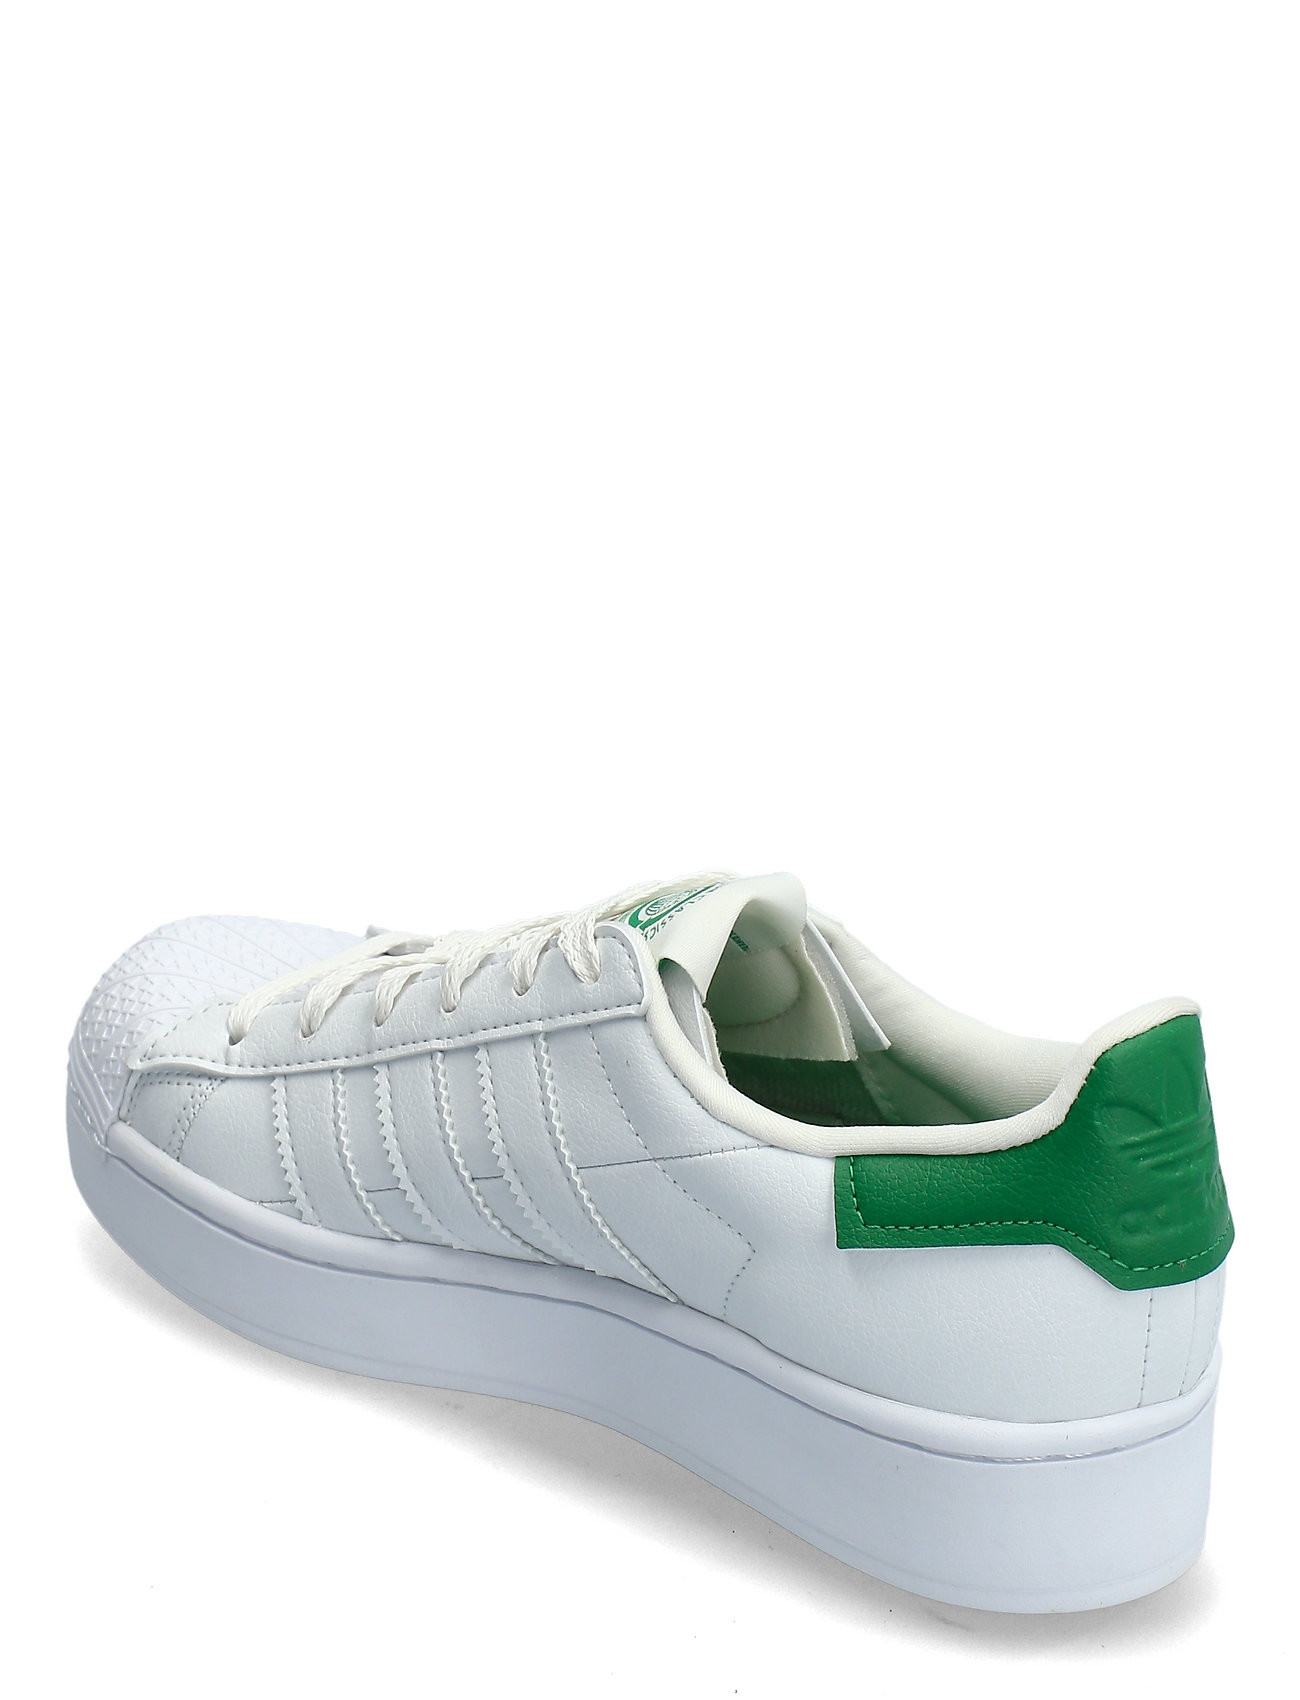 affald mareridt Kiks FTWWHT/OWHITE/GREEN Adidas Superstar Bold W Low-top Sneakers Grøn Adidas  Originals sneakers for dame - Pashion.dk